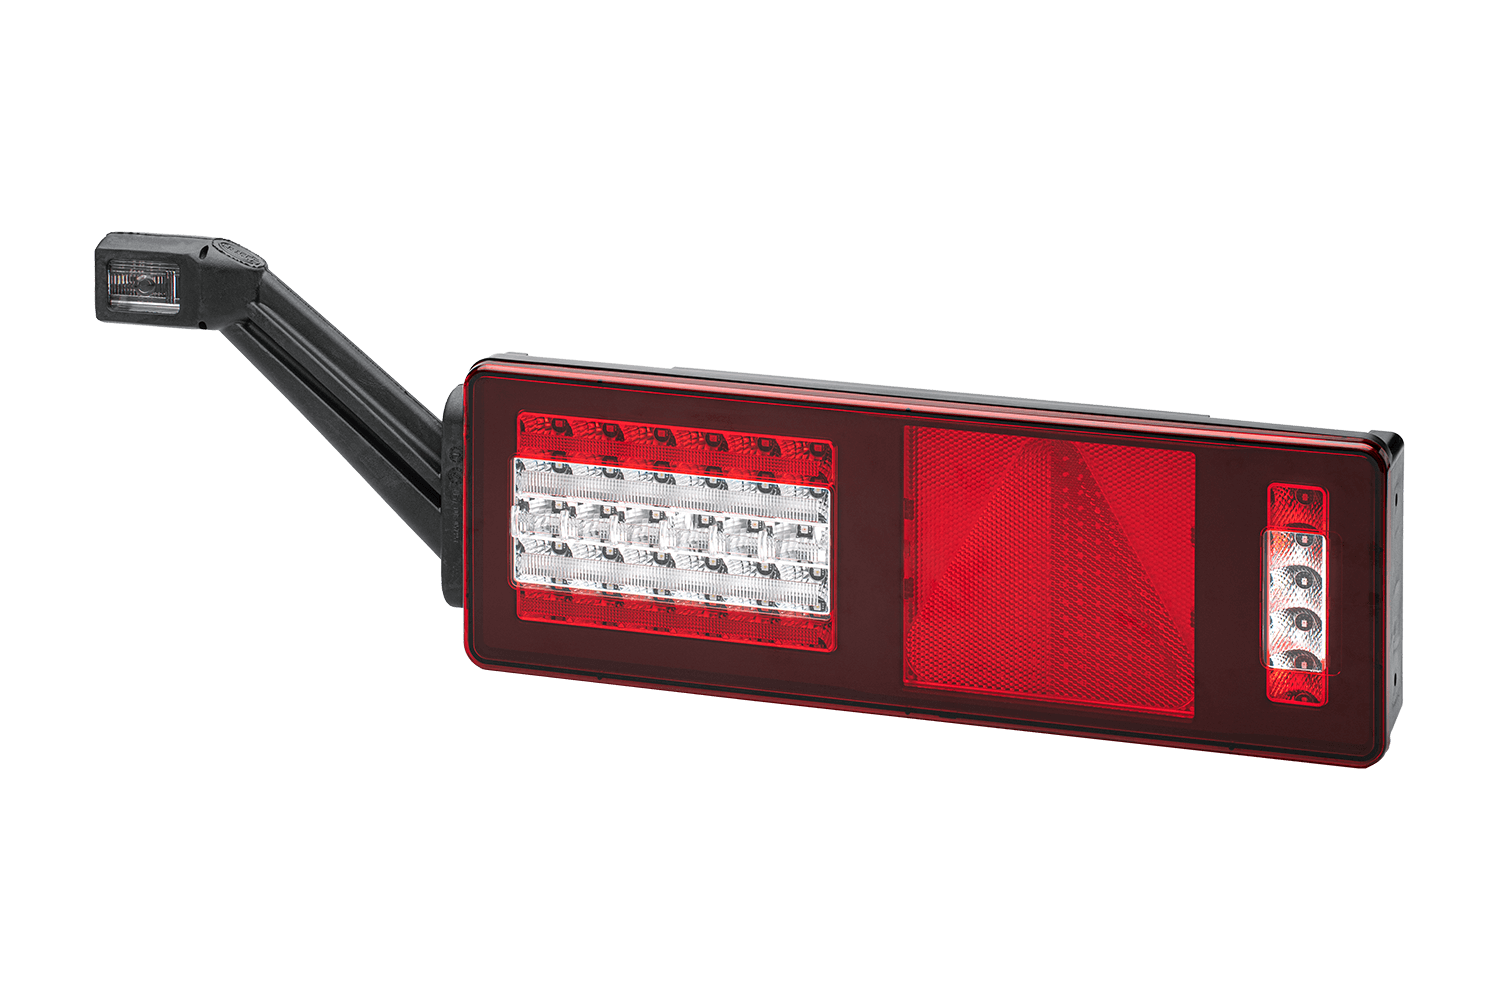 340 970 Full-LED rear lamp, multi-function lamp from Hella offered by Patlon